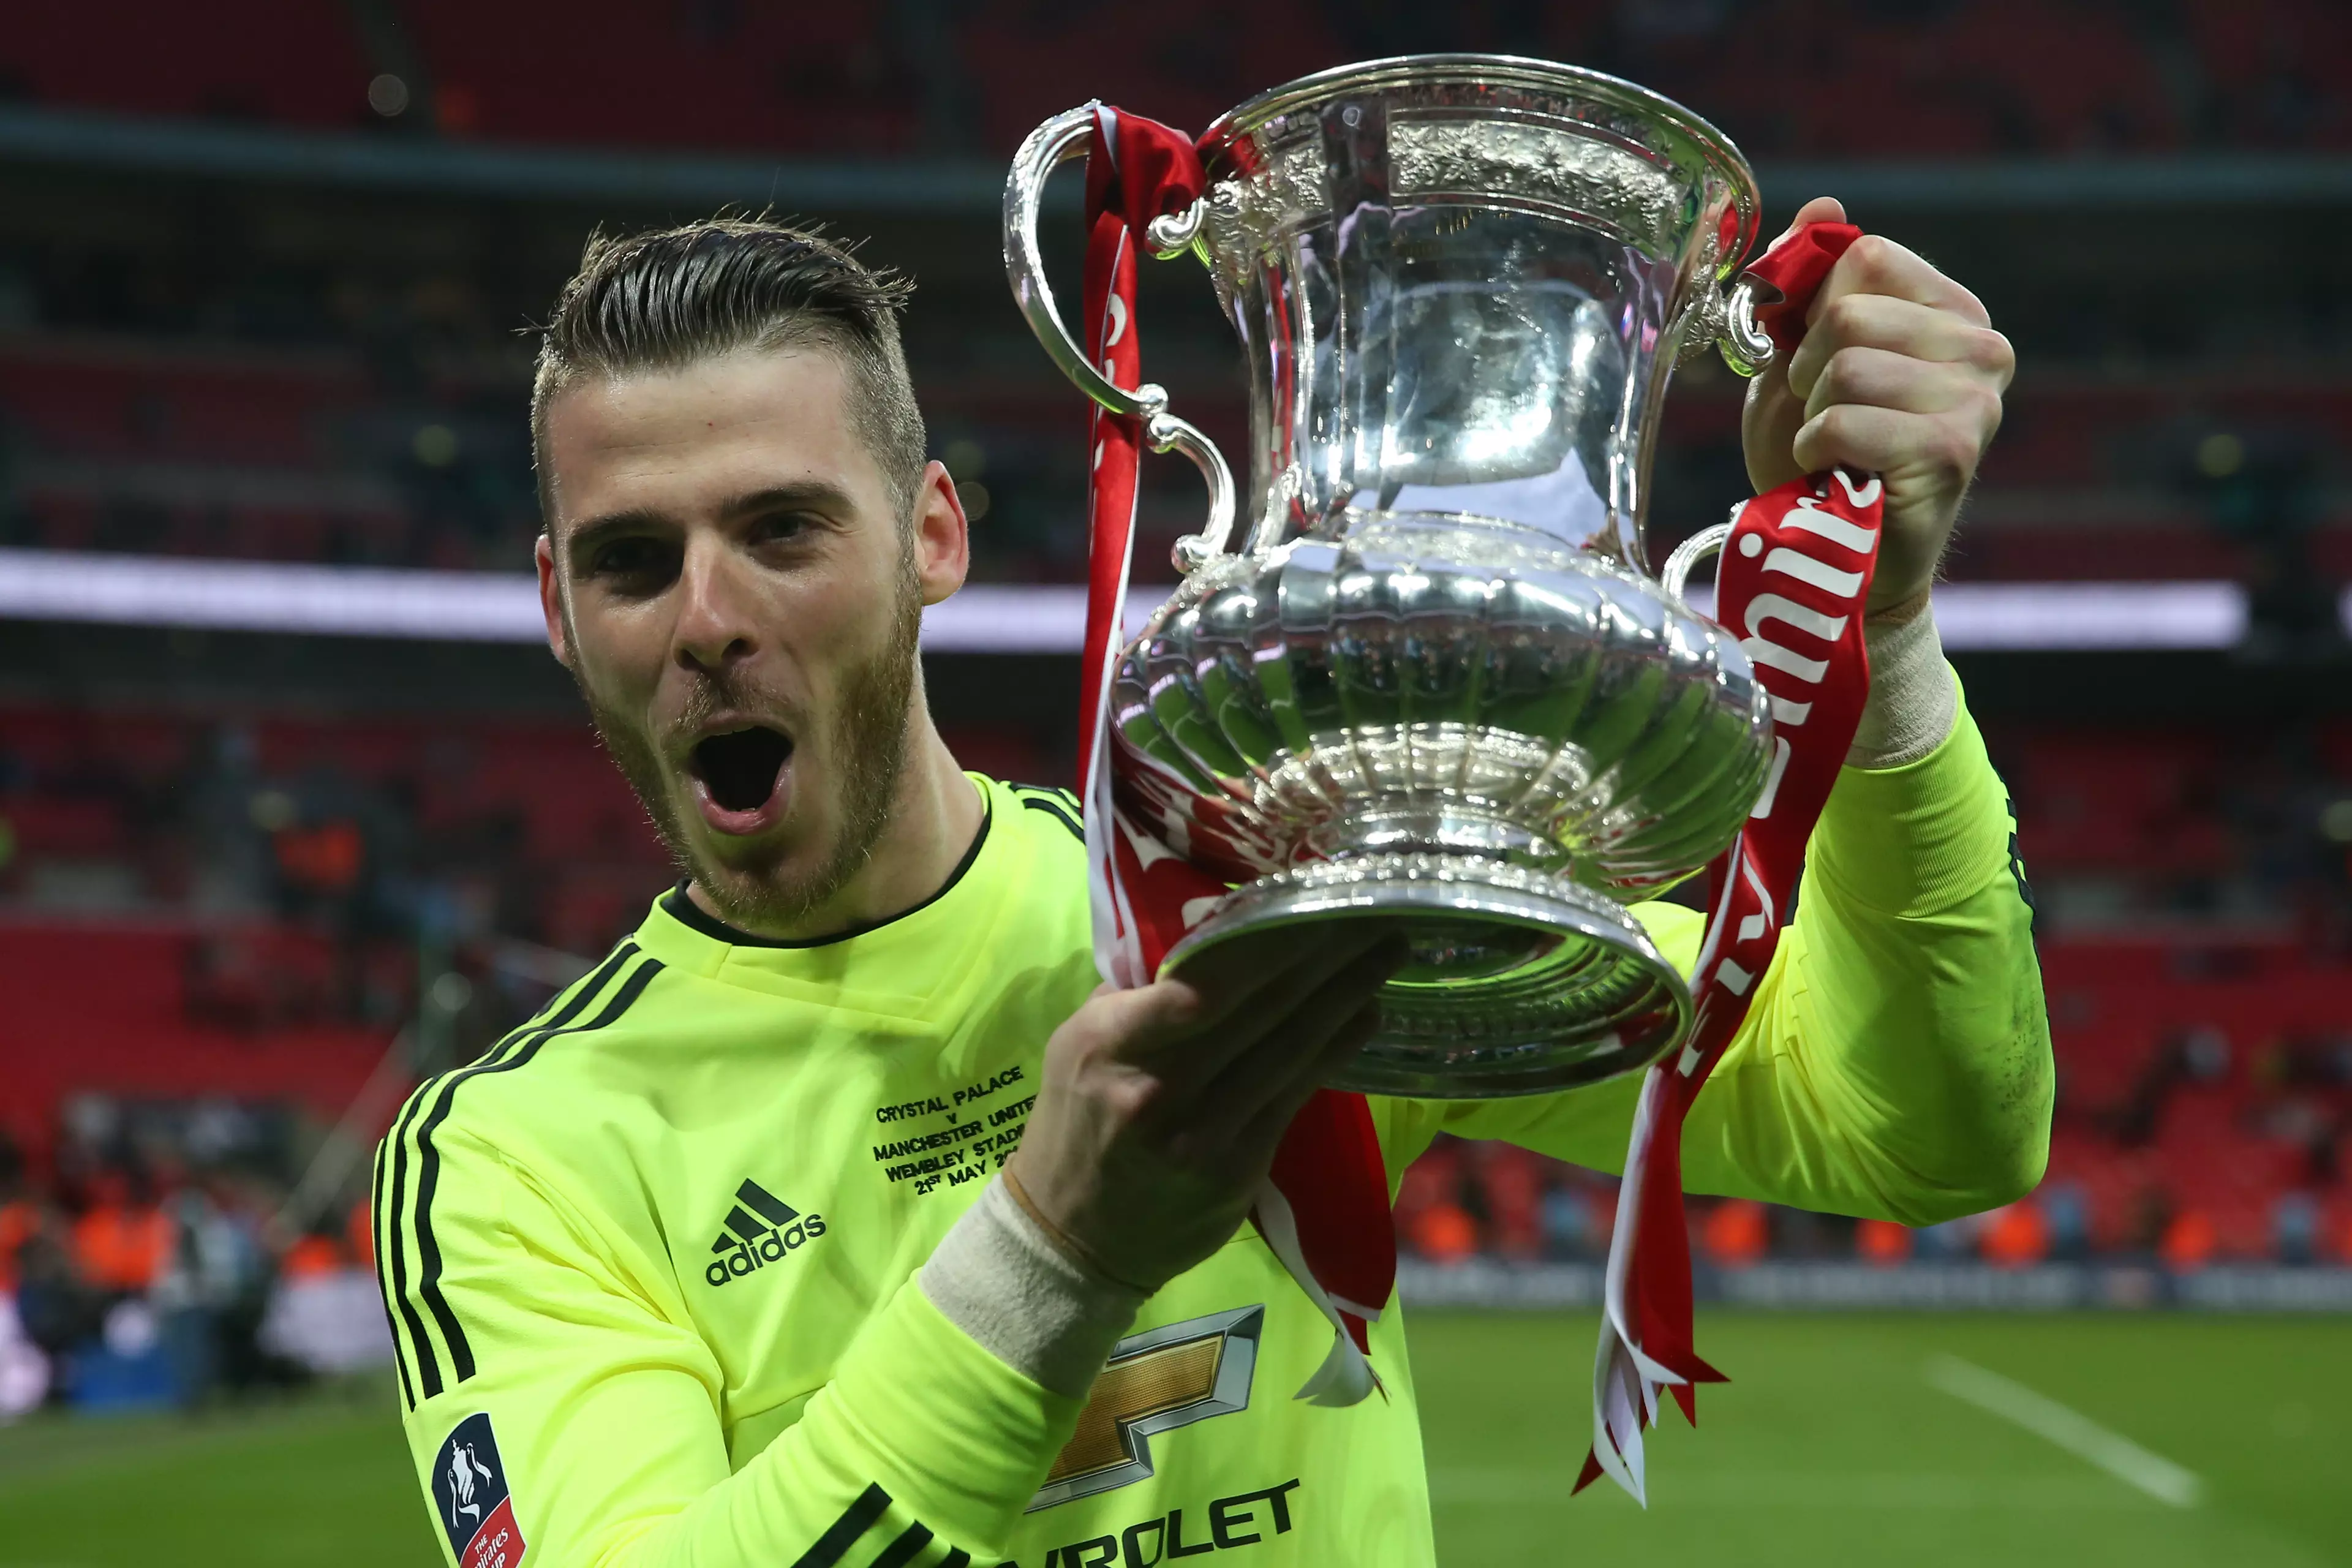 The goalkeeper is no stranger to silverware. Image: PA Images